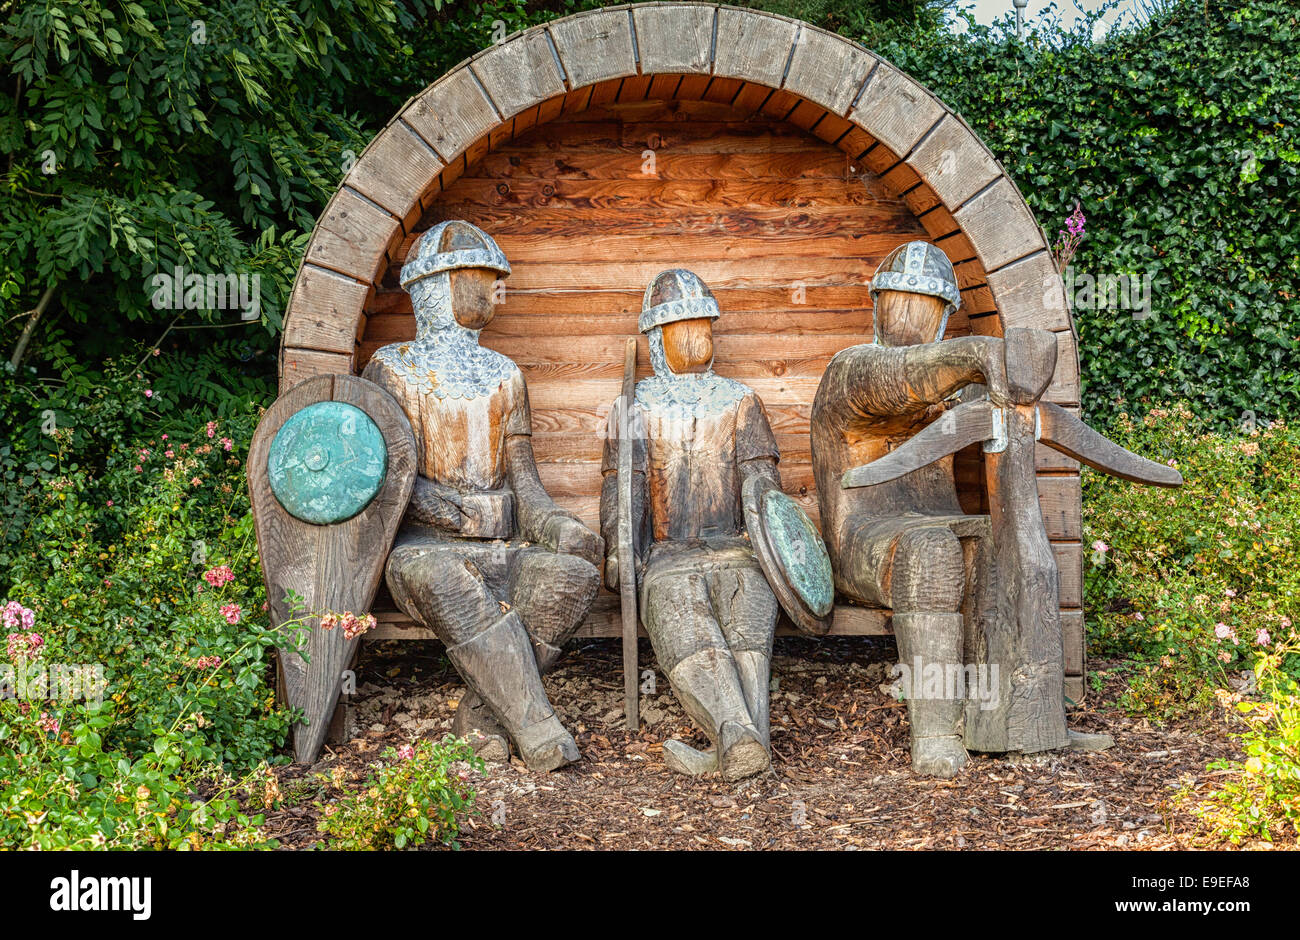 Rhuddlan Denbighshire North Wales UK. Three faceless carved wooden Norman medieval soldiers seated in relaxed pose Stock Photo